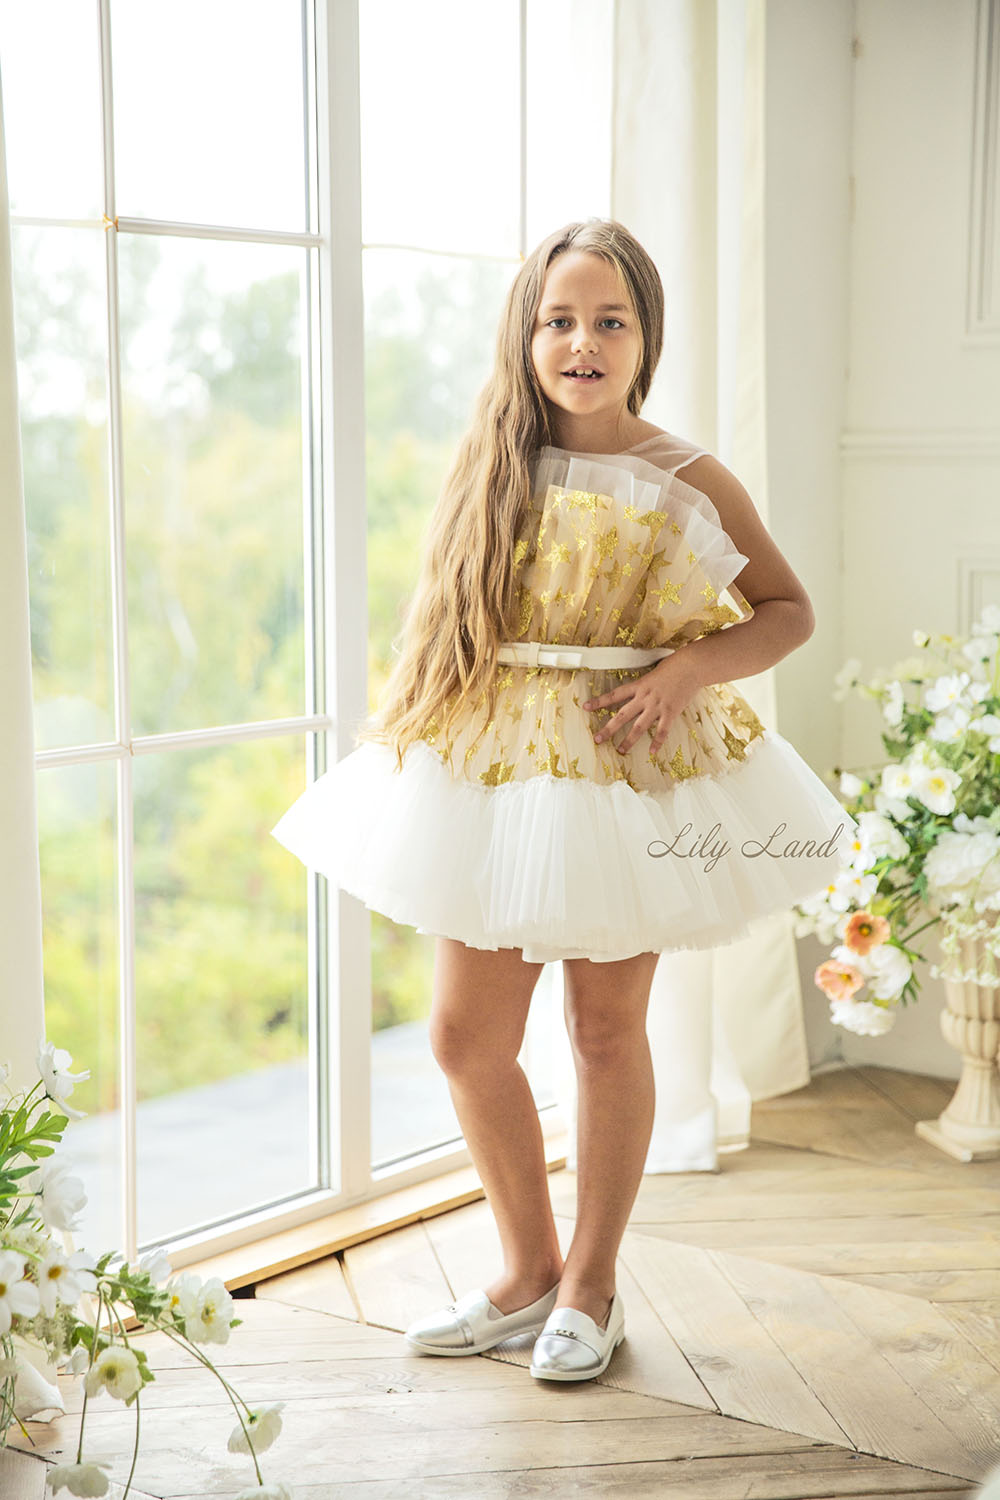 Barbie-Star White Baby Toddler Dress With Fluffy Skirt Sewn From Tulle Above The Knee